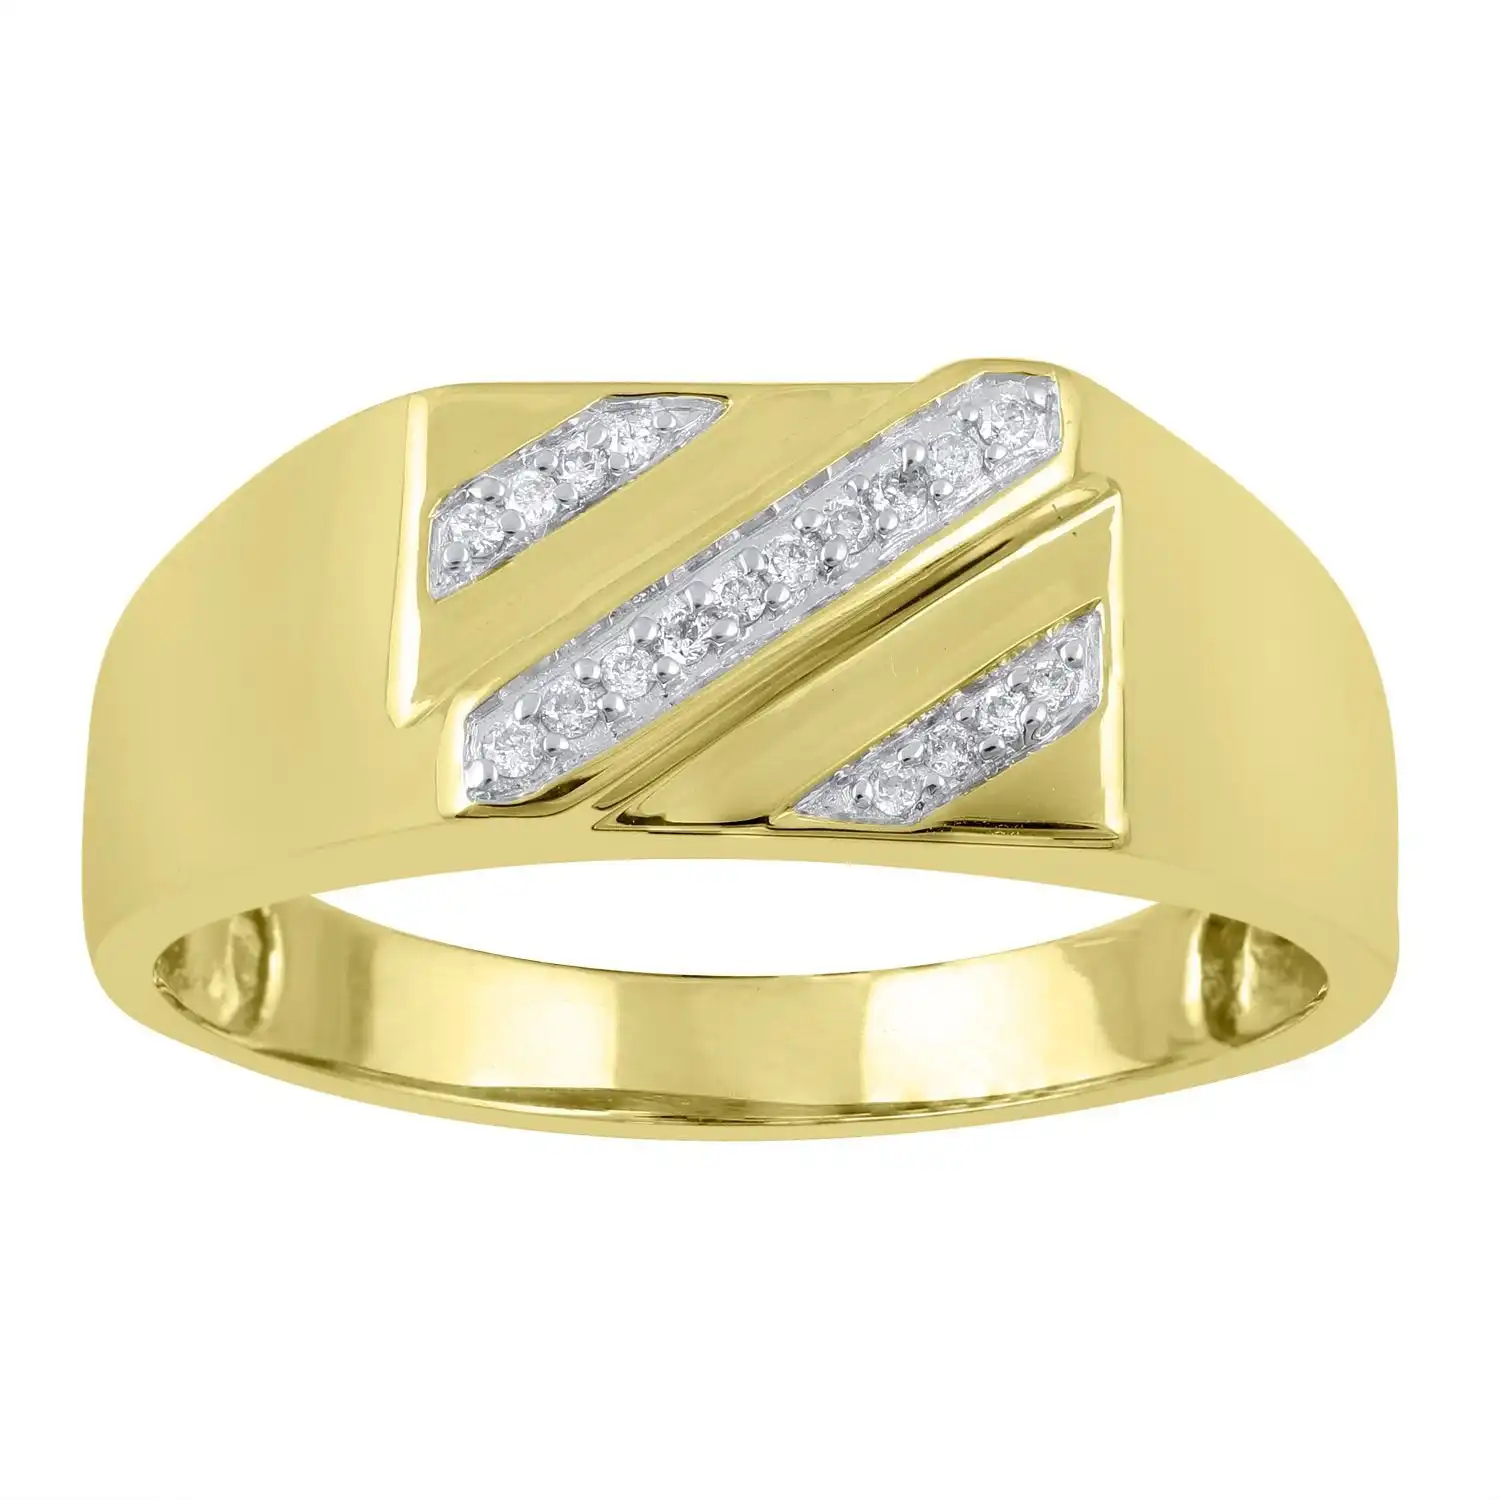 Men's Ring with 0.10ct of Diamonds in 9ct Yellow Gold